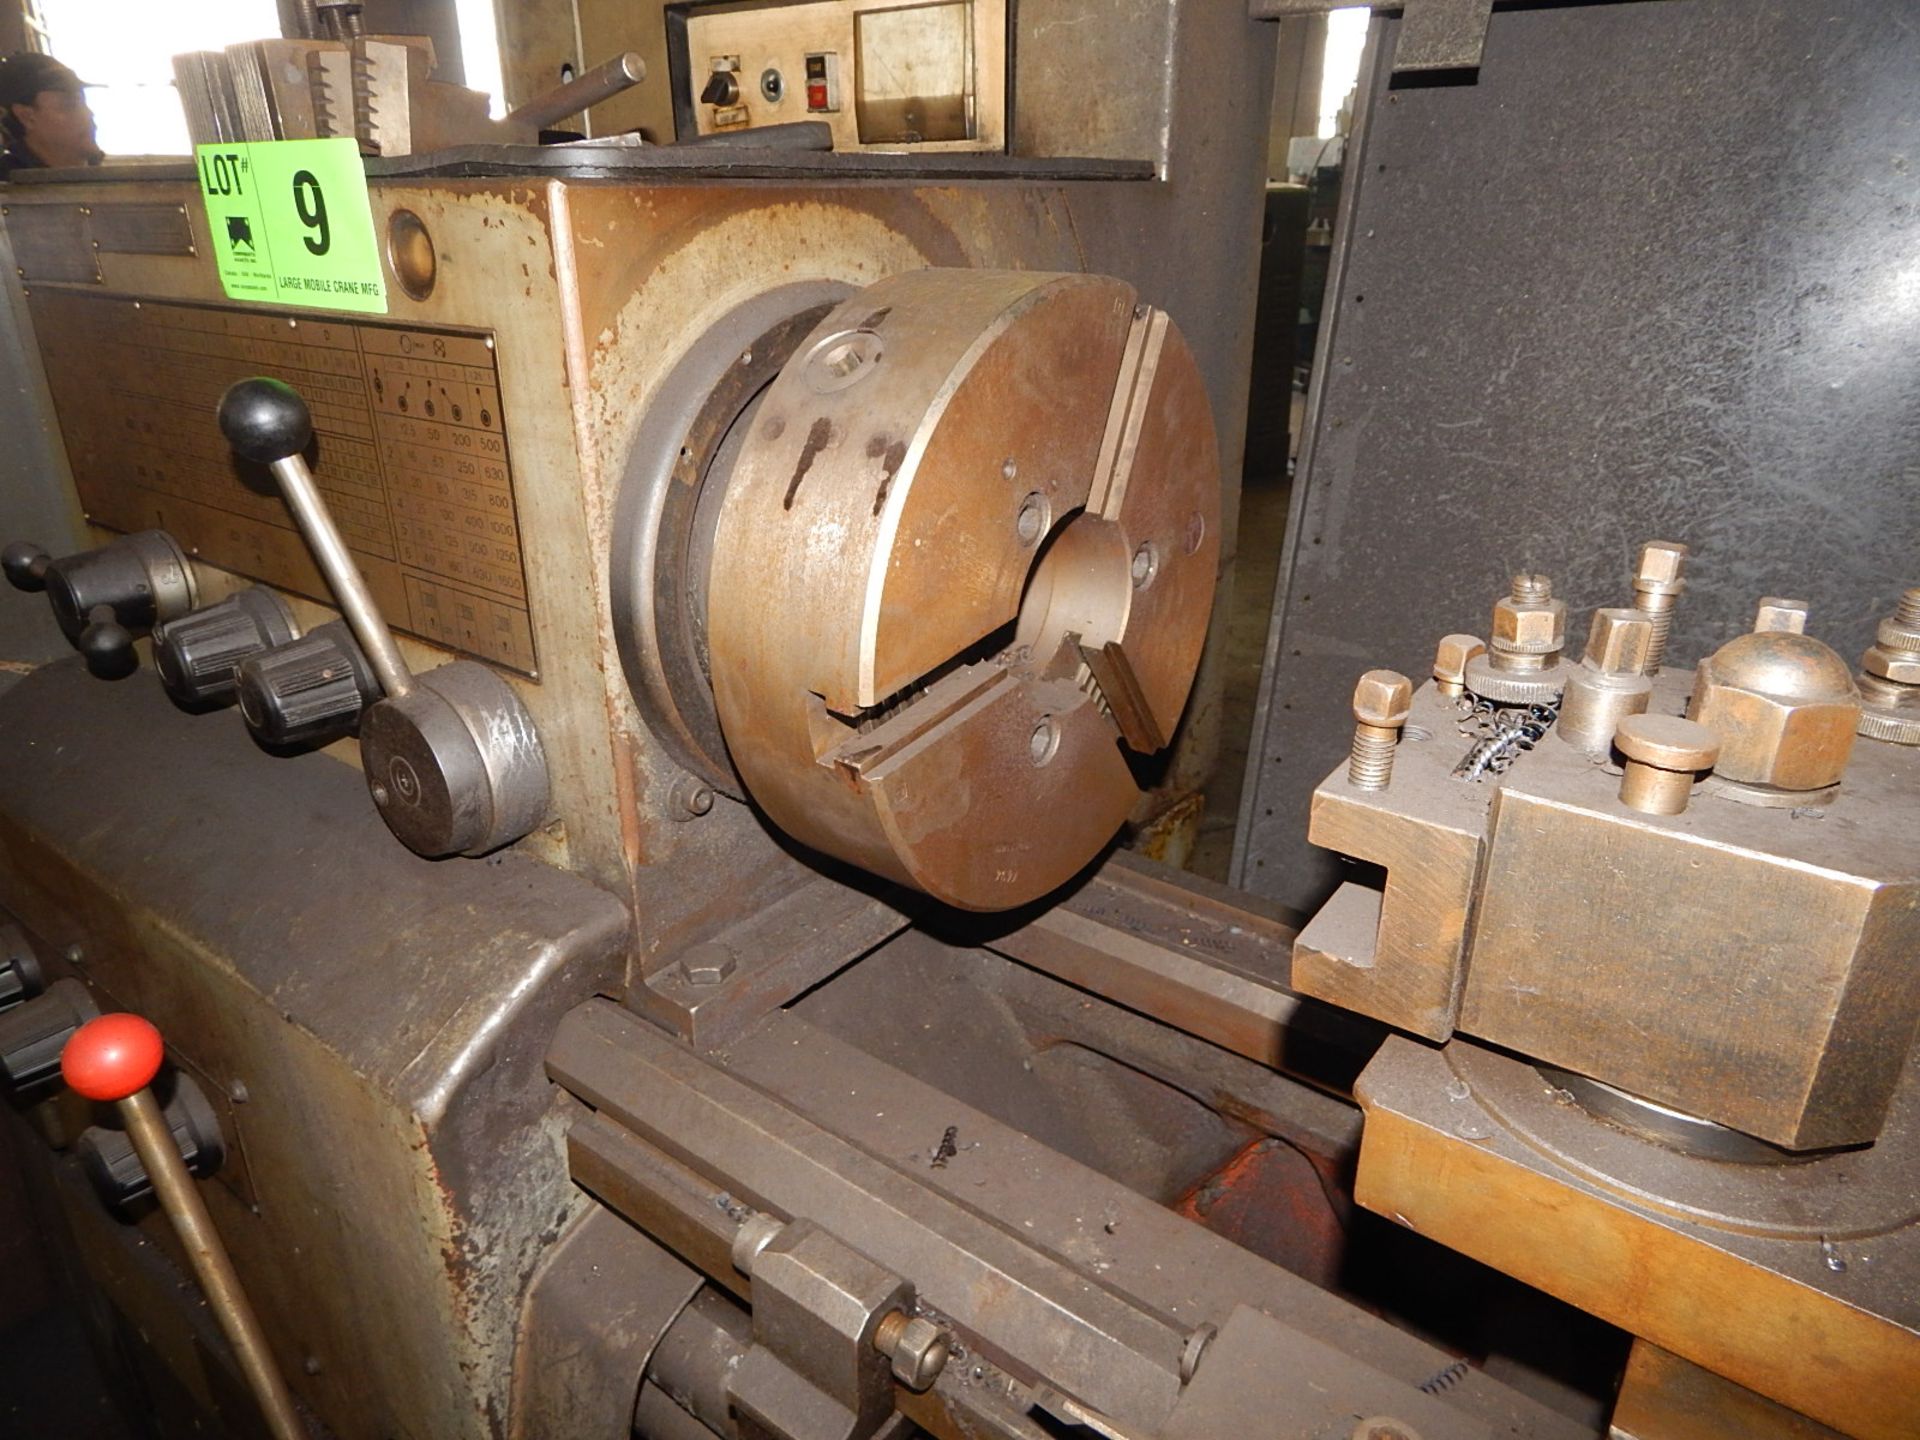 K&N 16K25 ENGINE LATHE WITH 22" SWING OVER BED, 64" BETWEEN CENTERS, 2.25" SPINDLE BORE, SPEEDS TO - Image 6 of 6